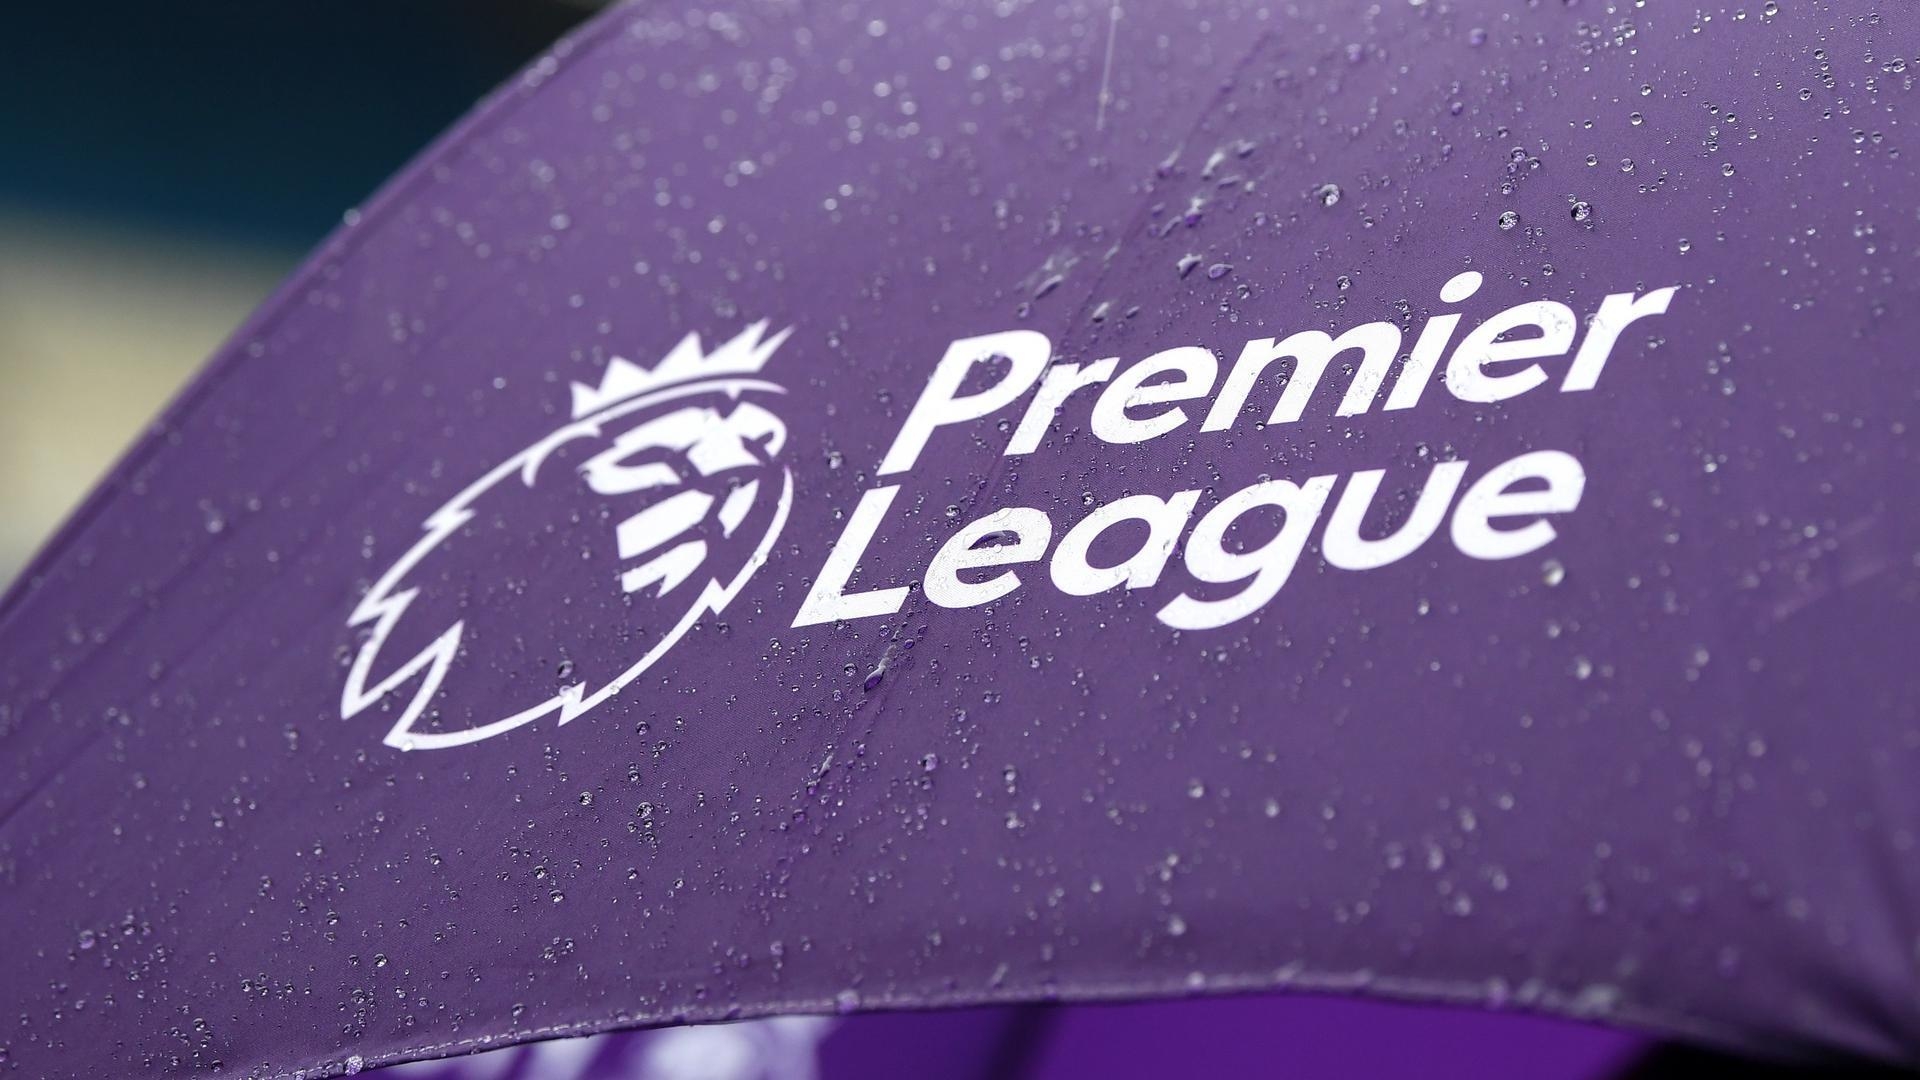 Premier League 2020/21 Matchday 29: Schedules, Fixtures and How to Watch